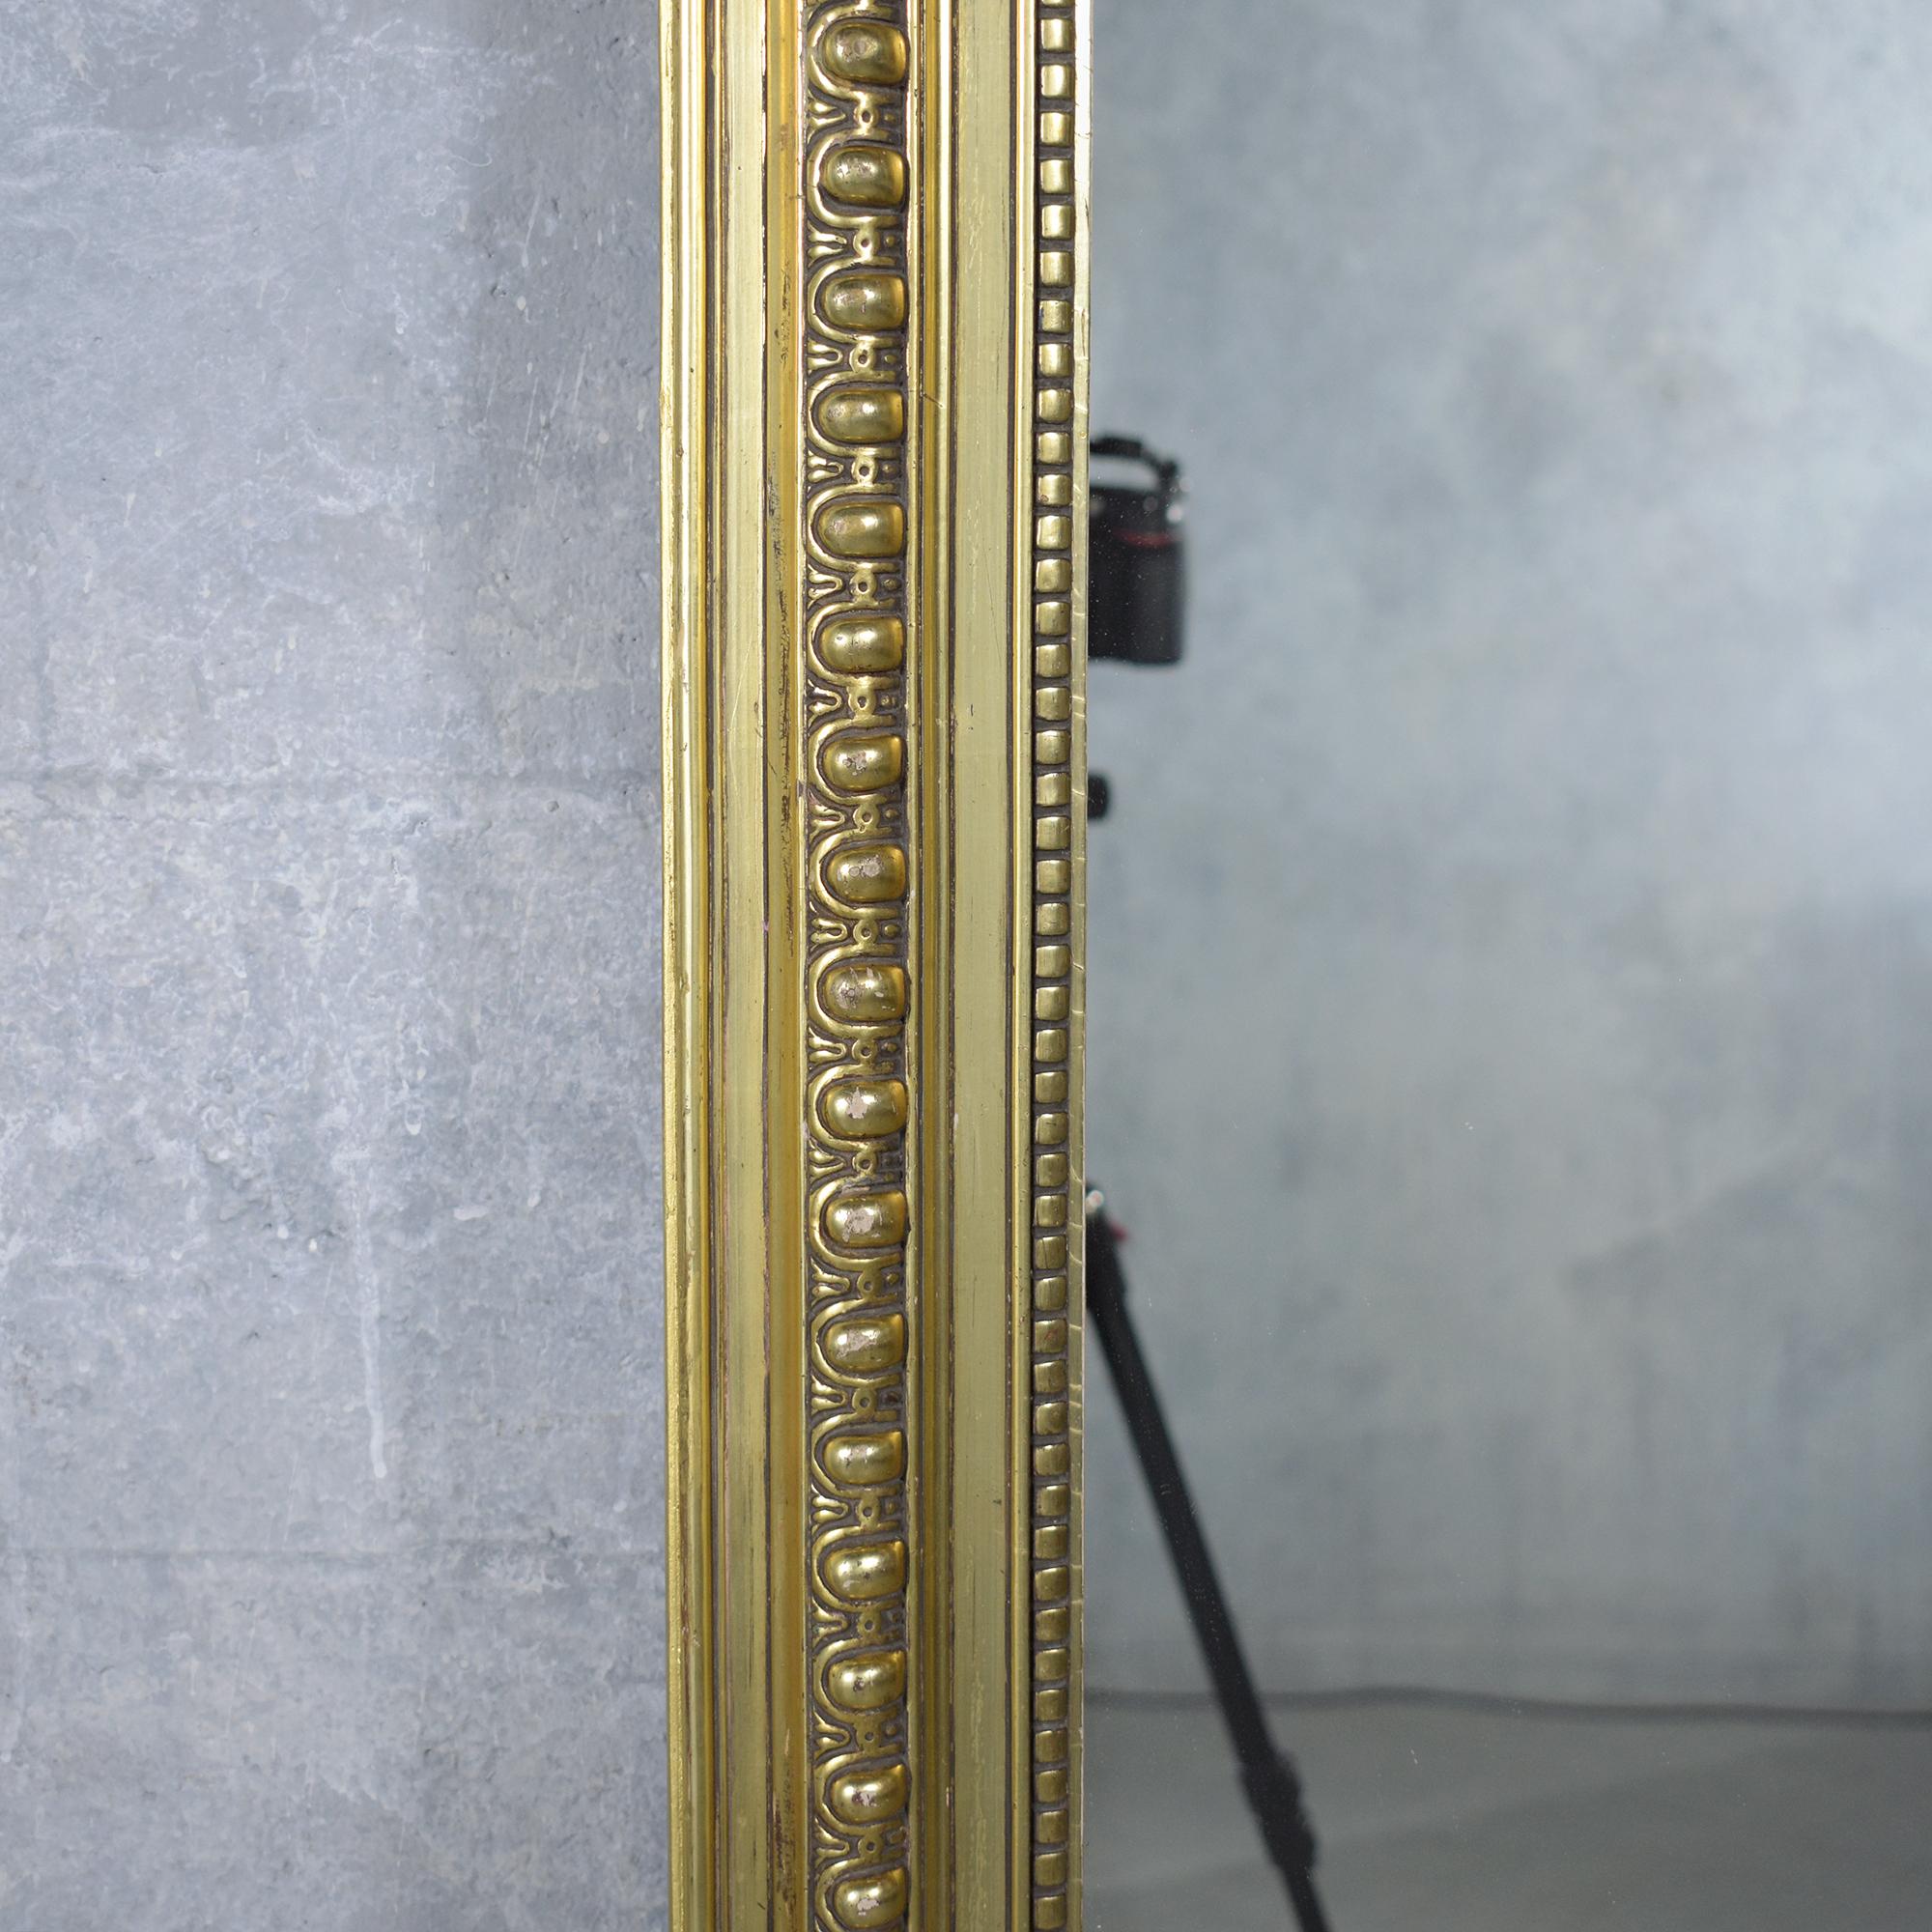 Late 19th-Century French Giltwood Standing Mirror: Restored Elegance For Sale 2